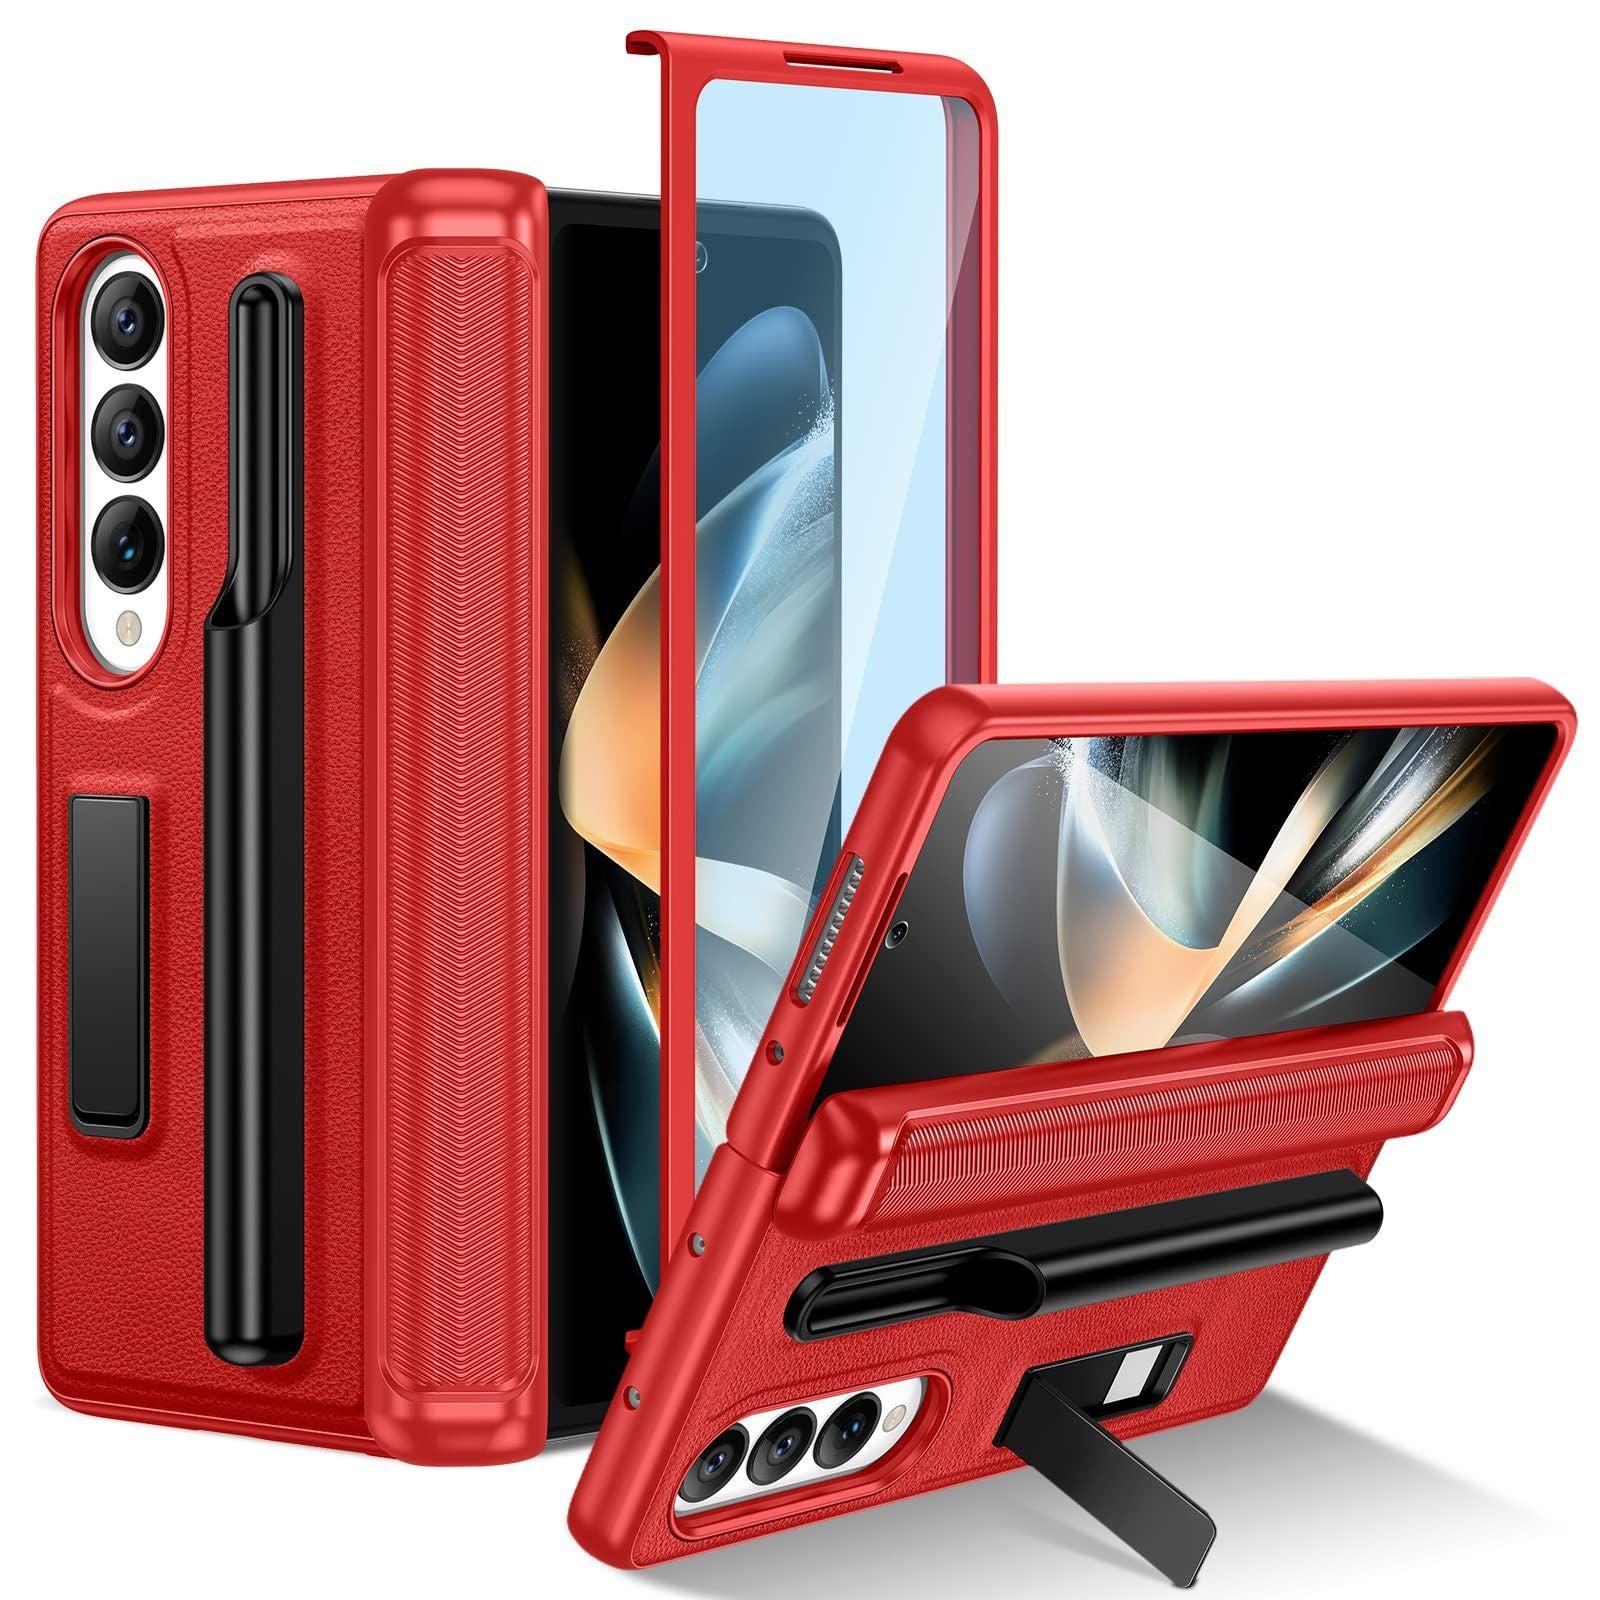 HWeggo for Samsung Galaxy Z Fold 4 Case with S Pen Holder and Kickstand,Samsung Z Fold 4 Case with Front Screen Protector,Hard PC Shockproof Anti-Scratch Hinge Coverage Protective Cover(Red)